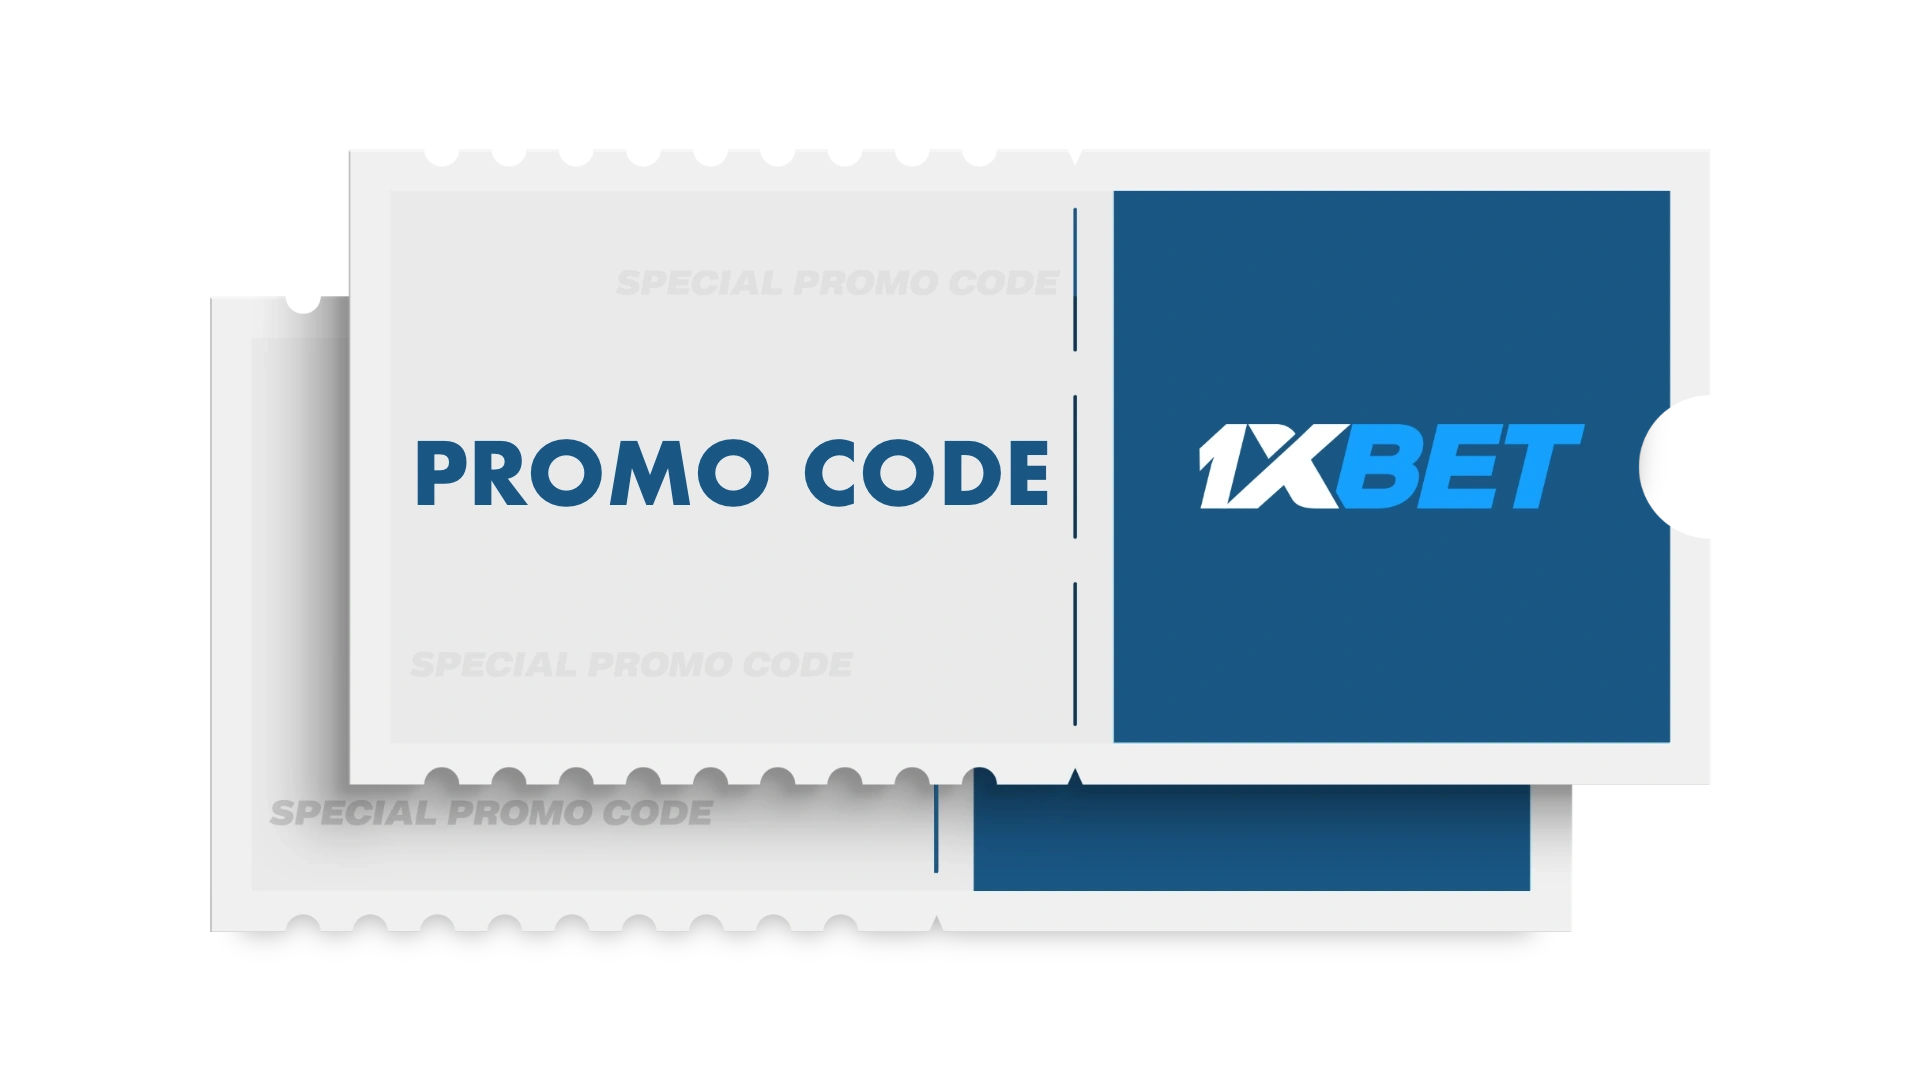 Actual 1xbet registration promo code for players from Bangladesh